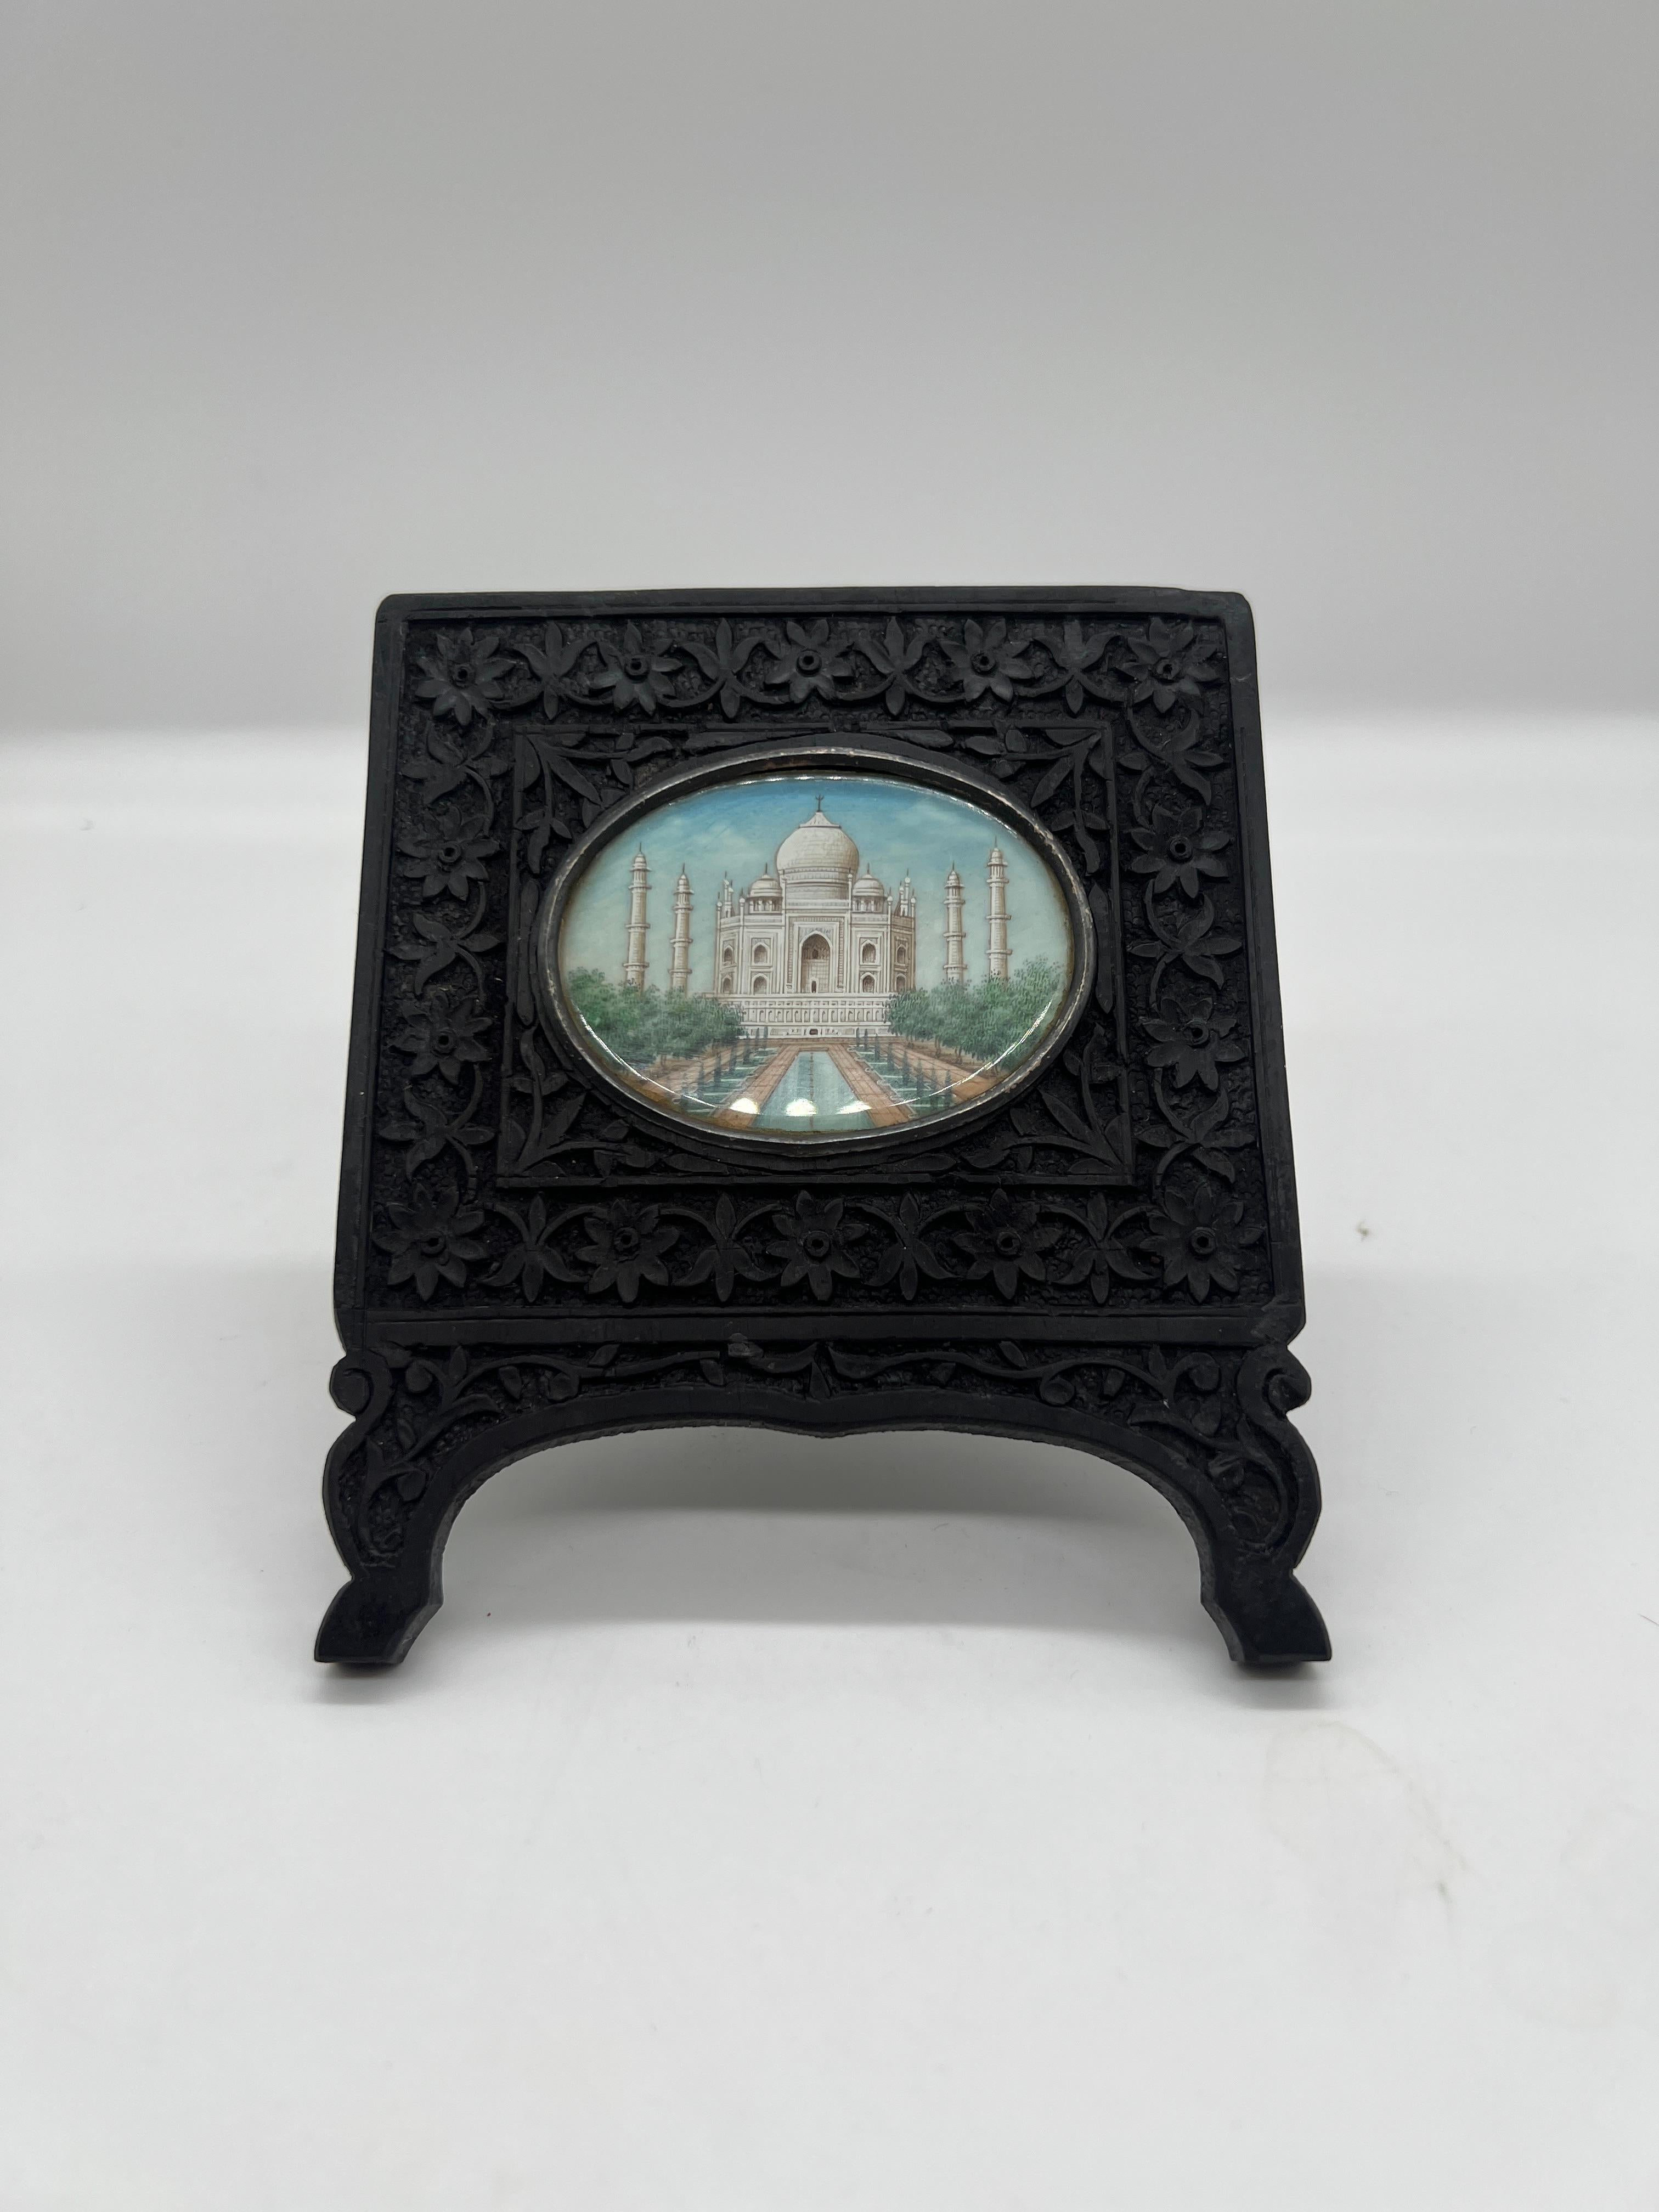 Embark on a journey through time with this extraordinary antique Anglo-Indian Grand Tour Era Miniature Taj Mahal Painting, nestled within a beautifully carved rosewood frame. Dating back to a bygone era of exploration and cultural exchange, this